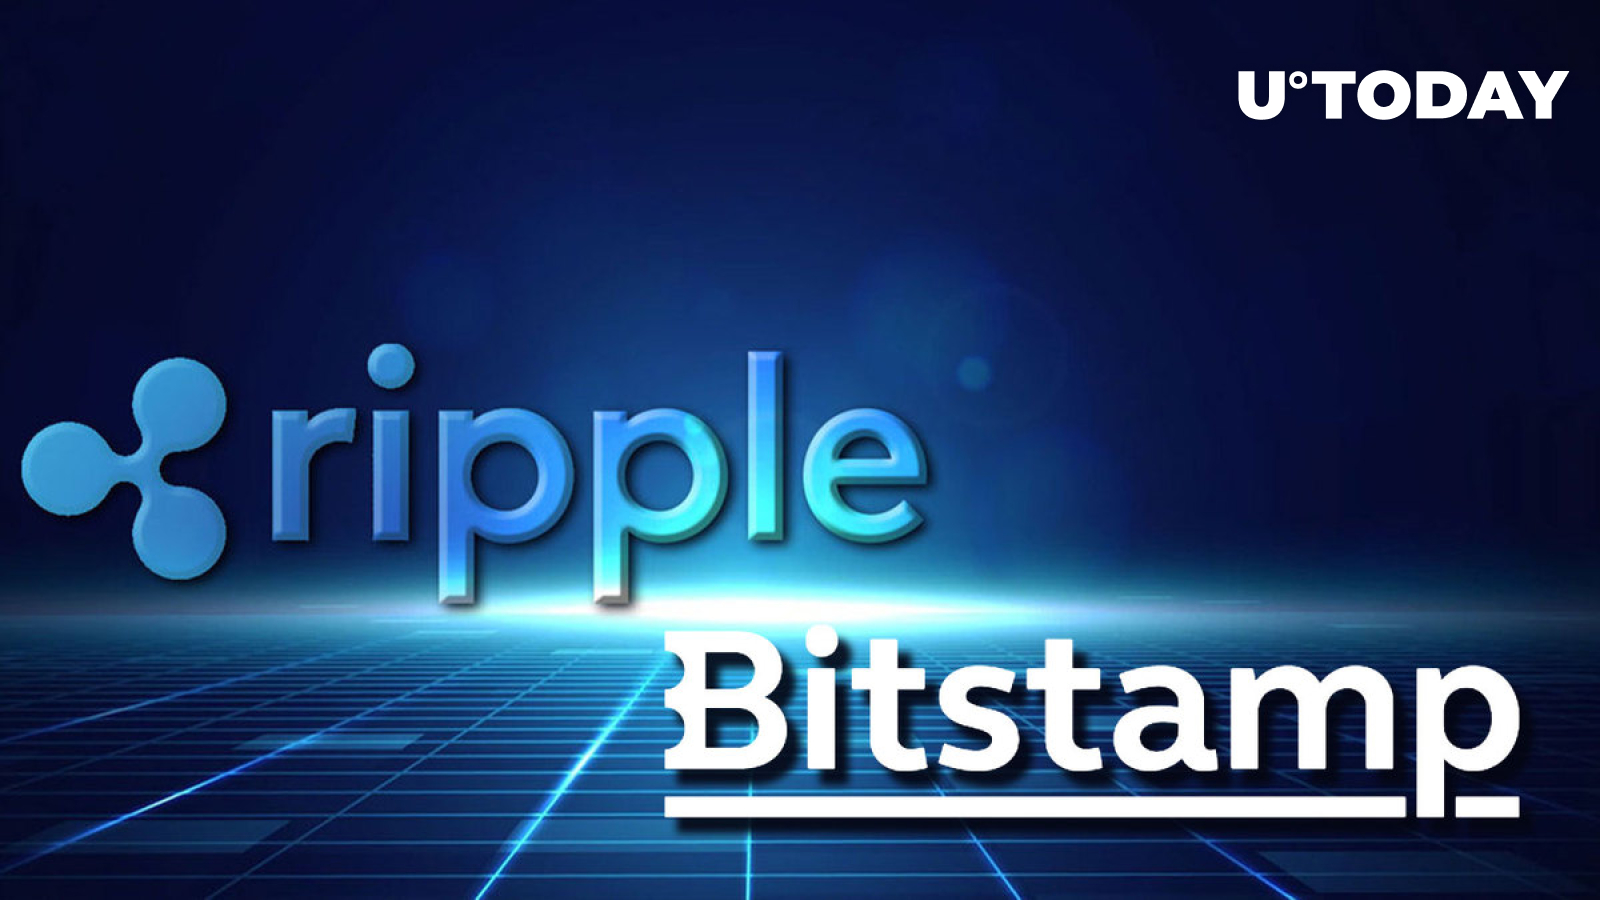 Bitstamp ripple to nano s what is a good crypto coin to buy right now